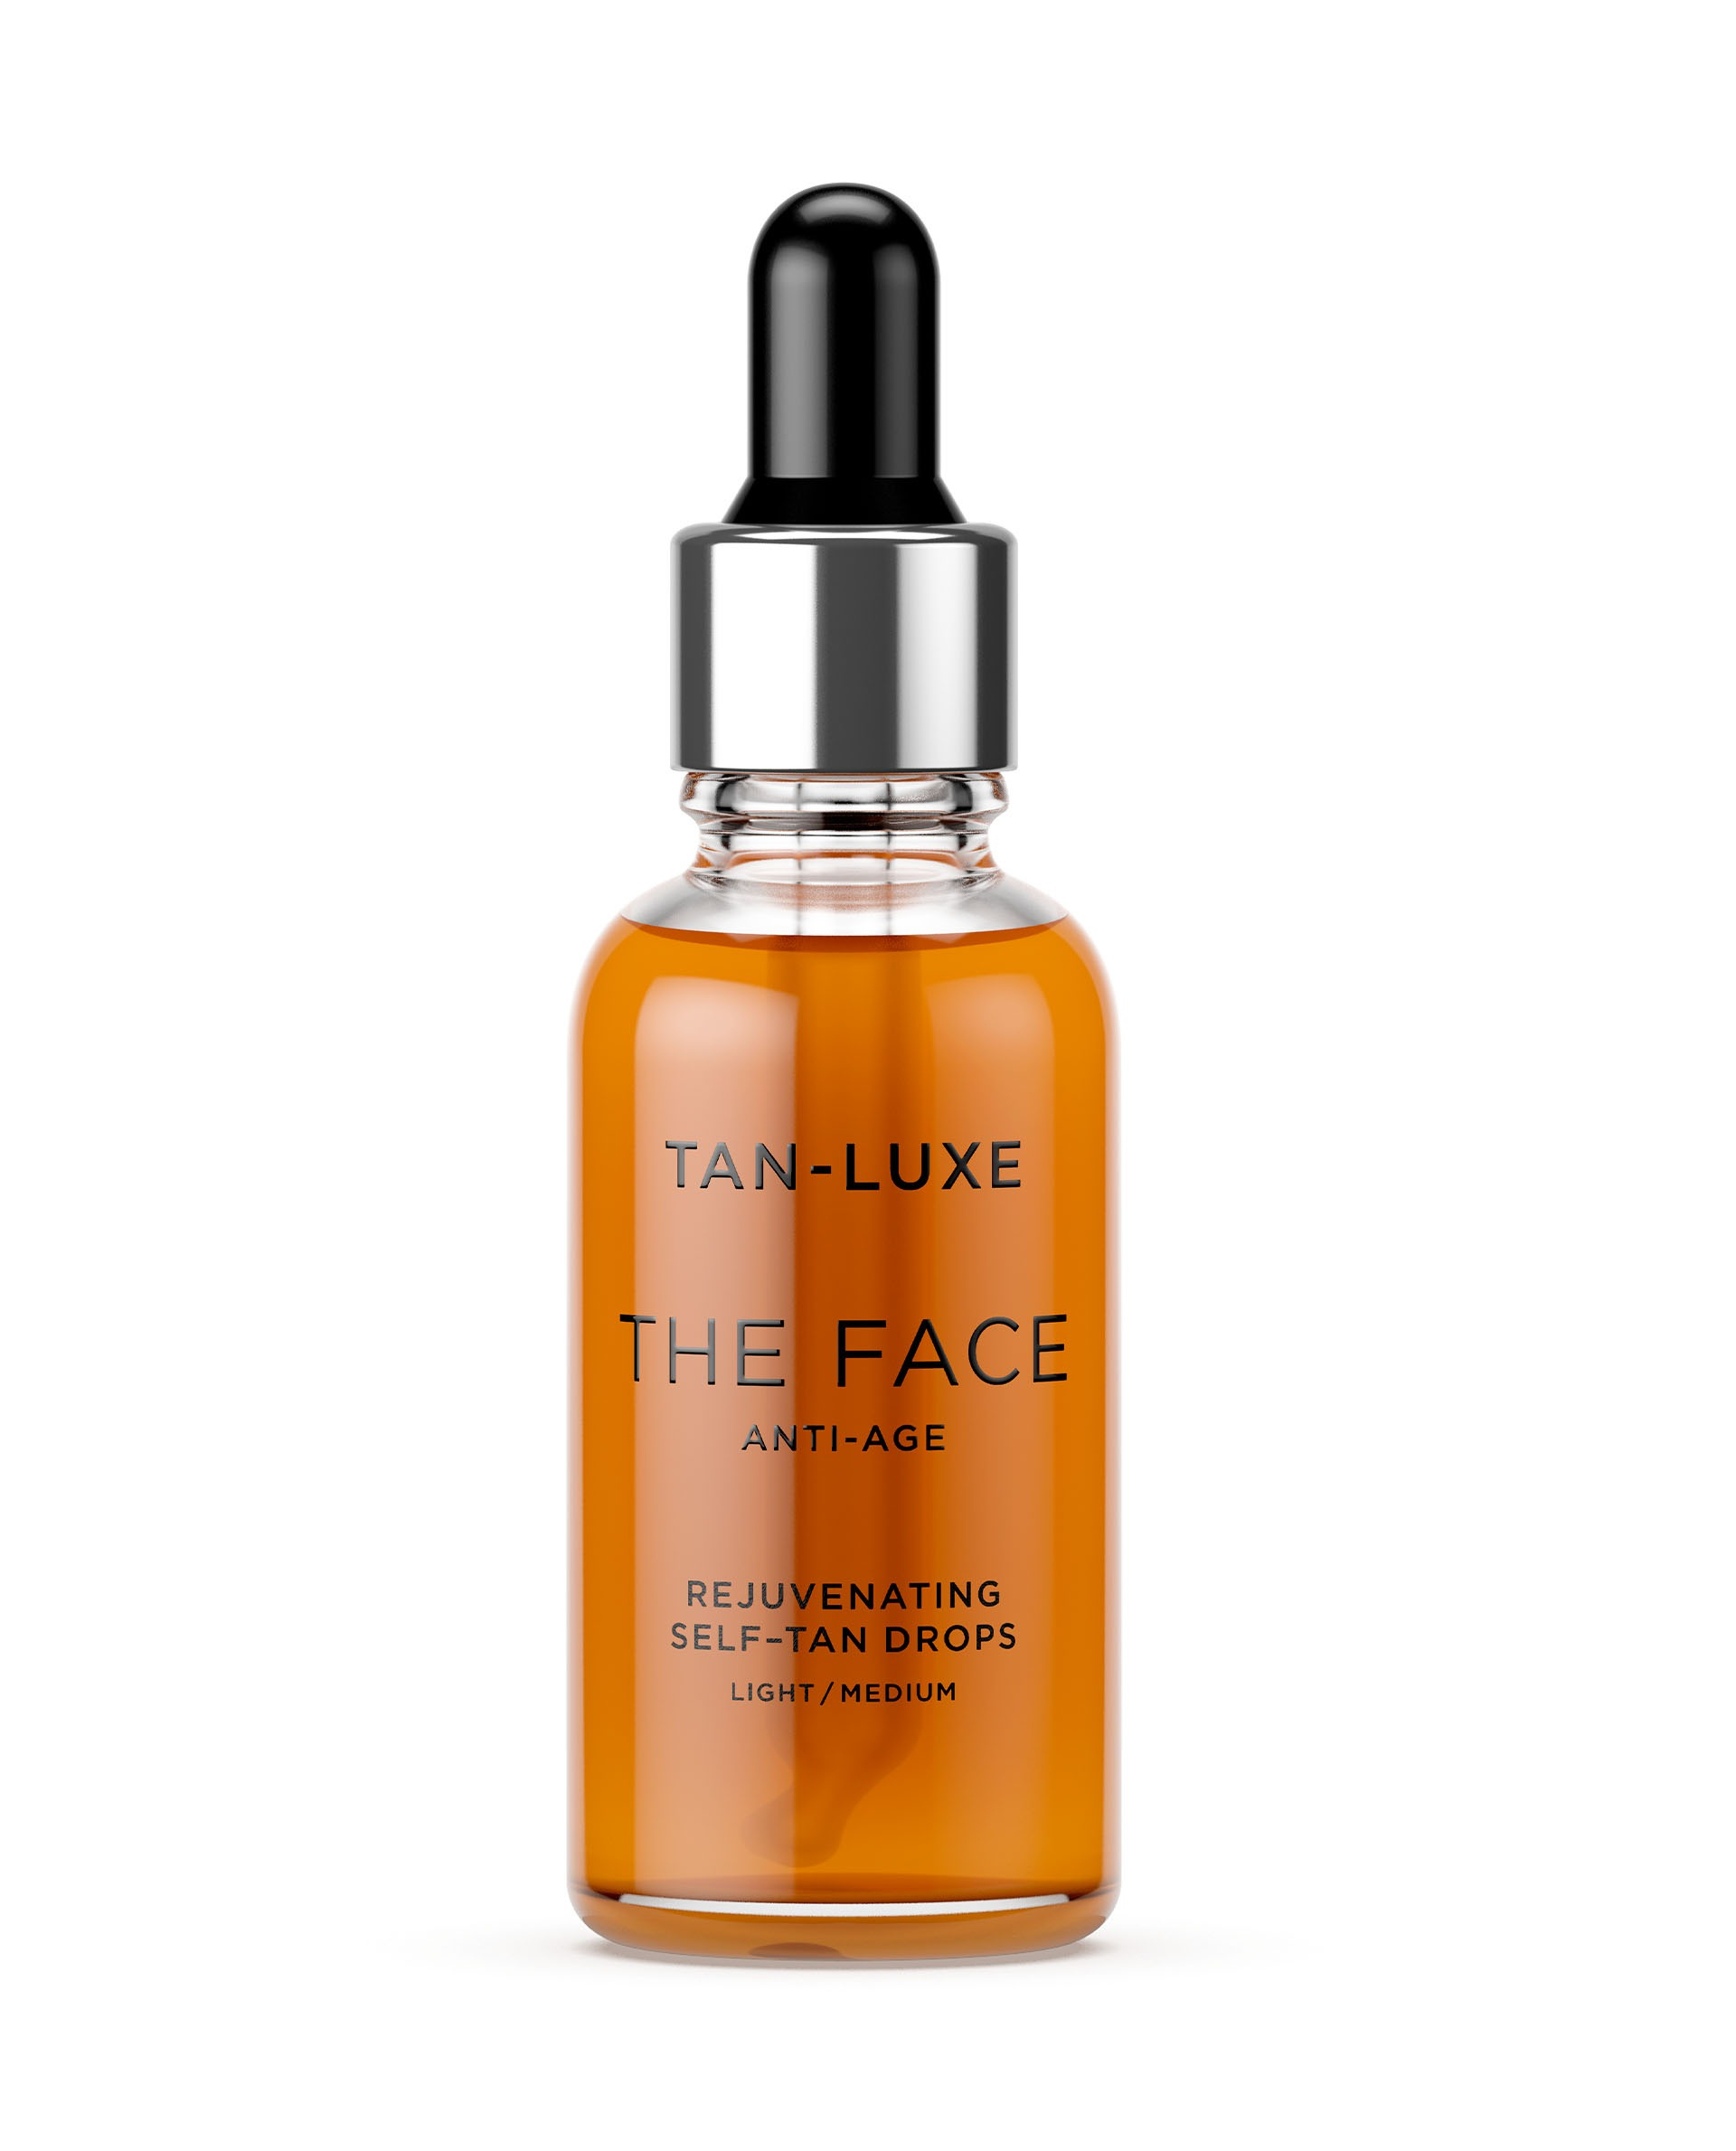 Tan-Luxe The Face: Anti-Age